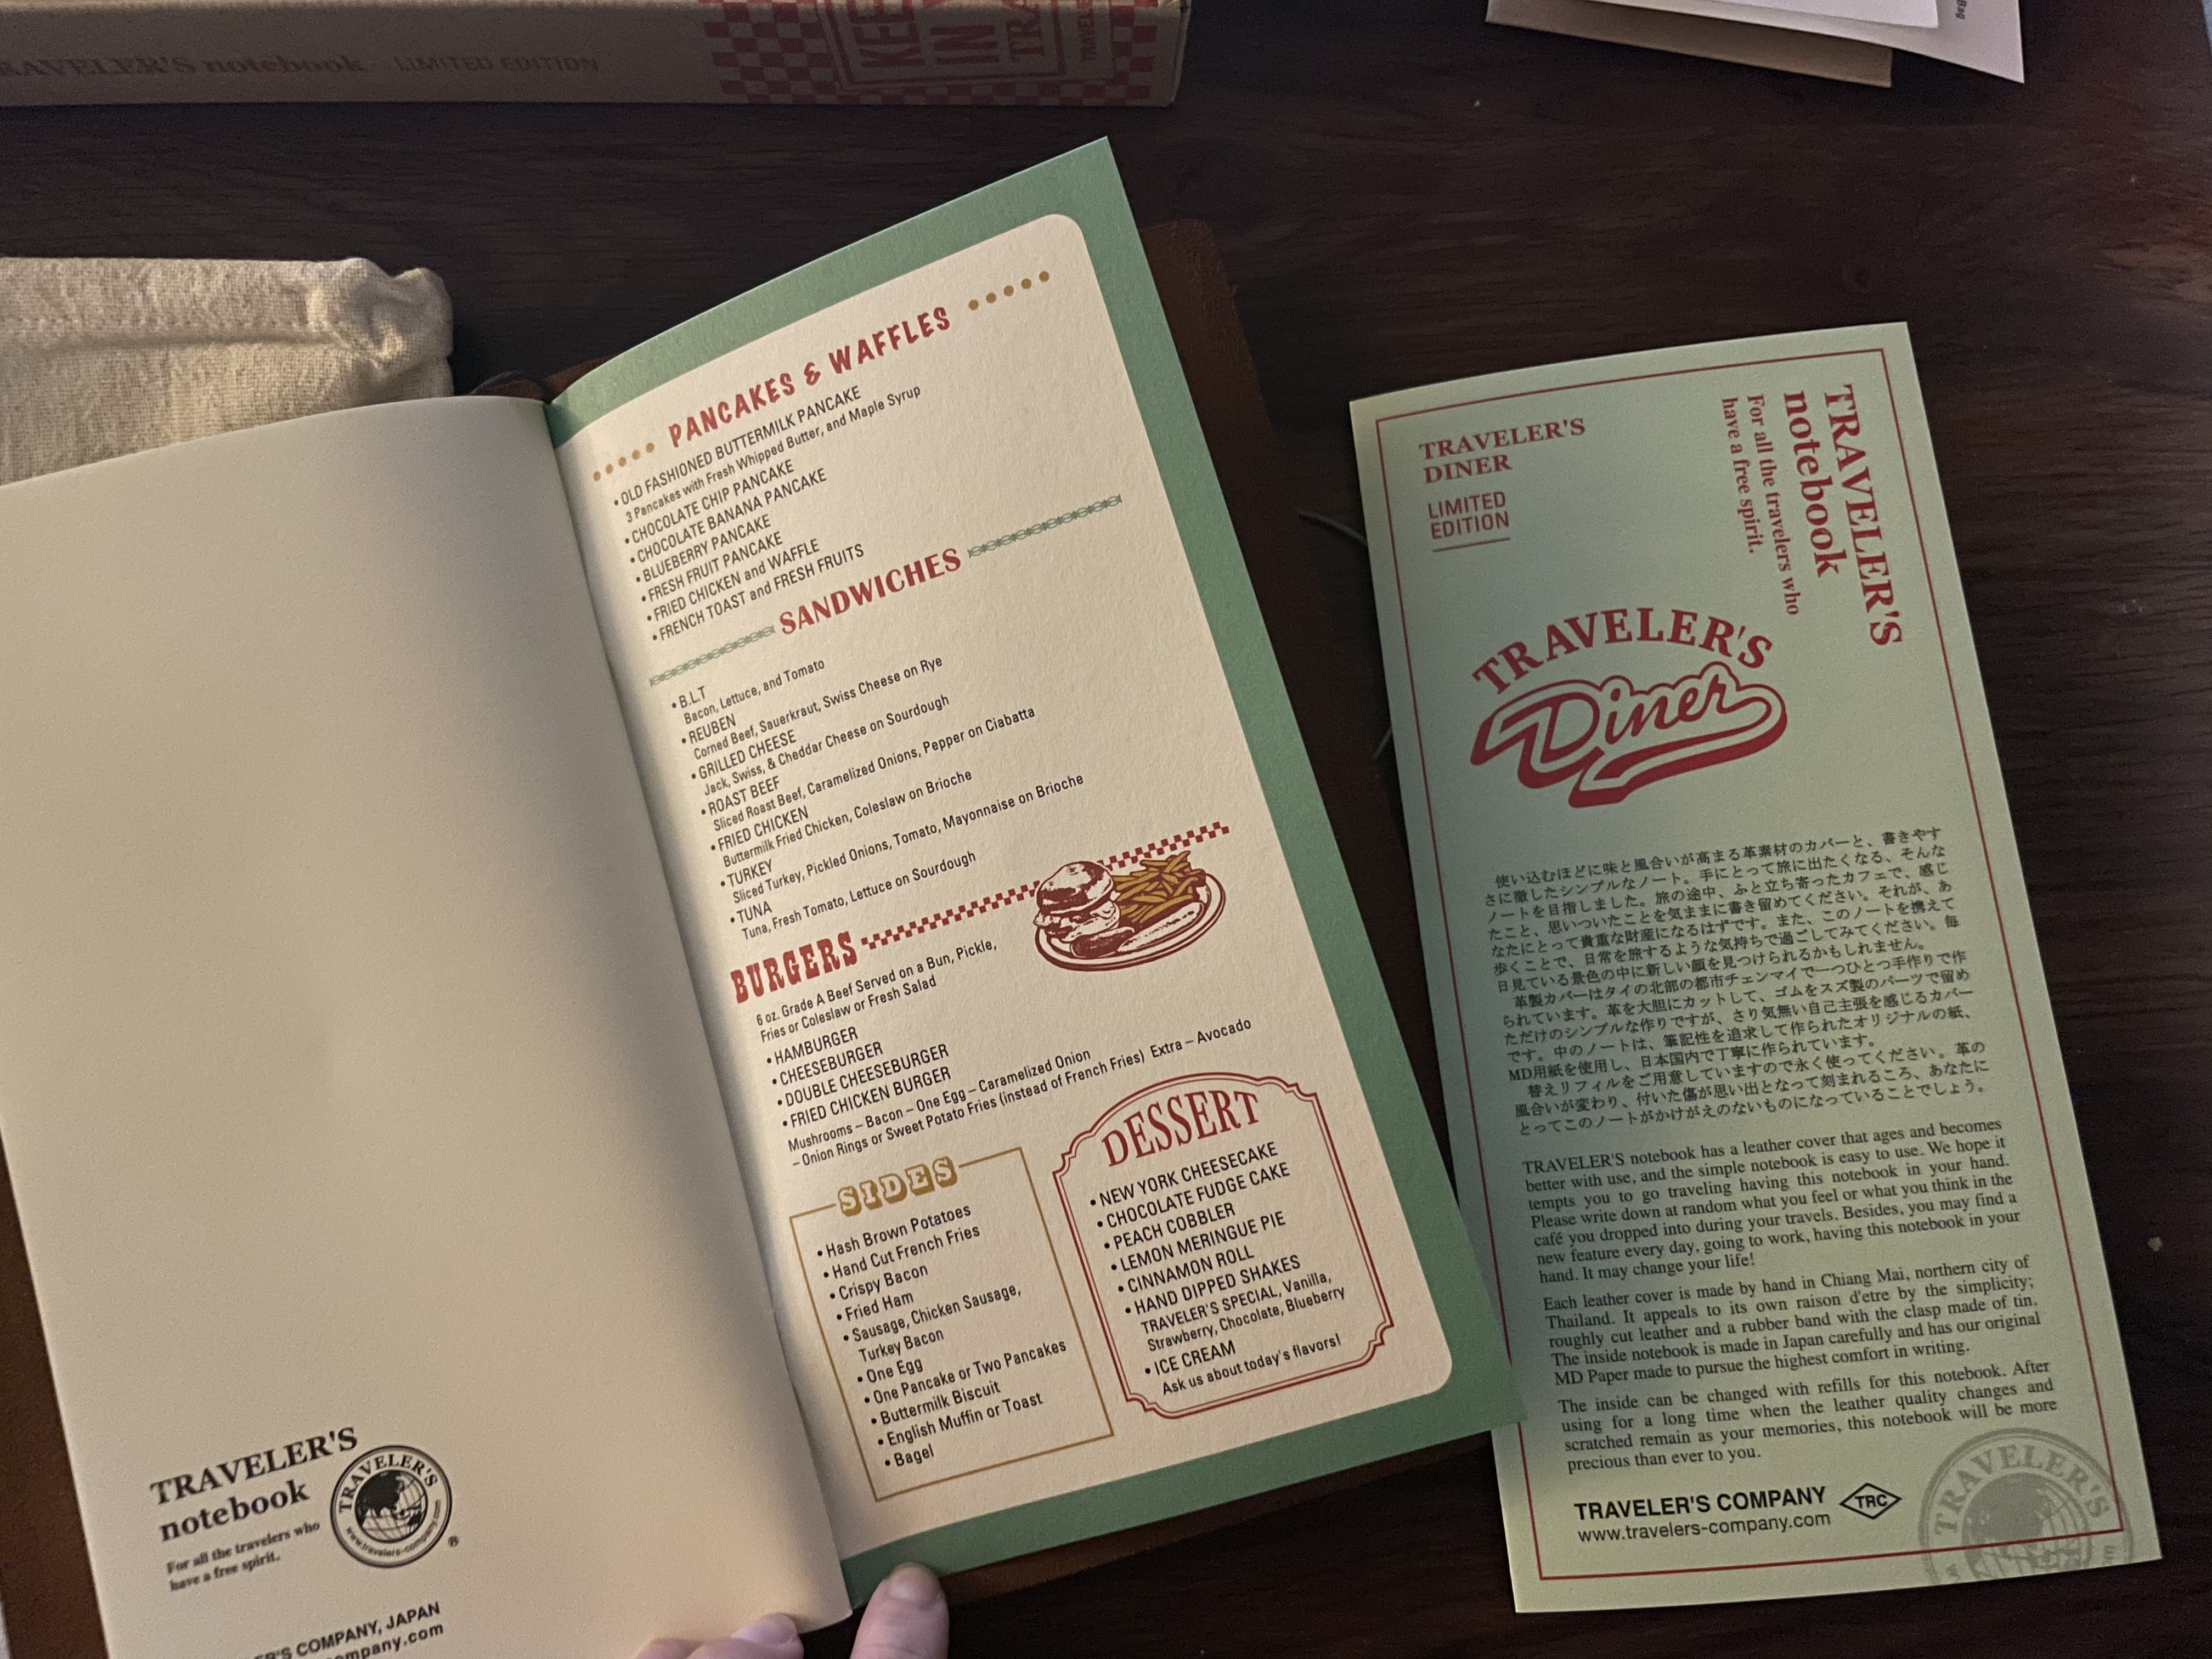 the right-side inner cover, which shows a diner menu with other sections: pancakes and waffles, sandwiches, burgers, sides, and dessert